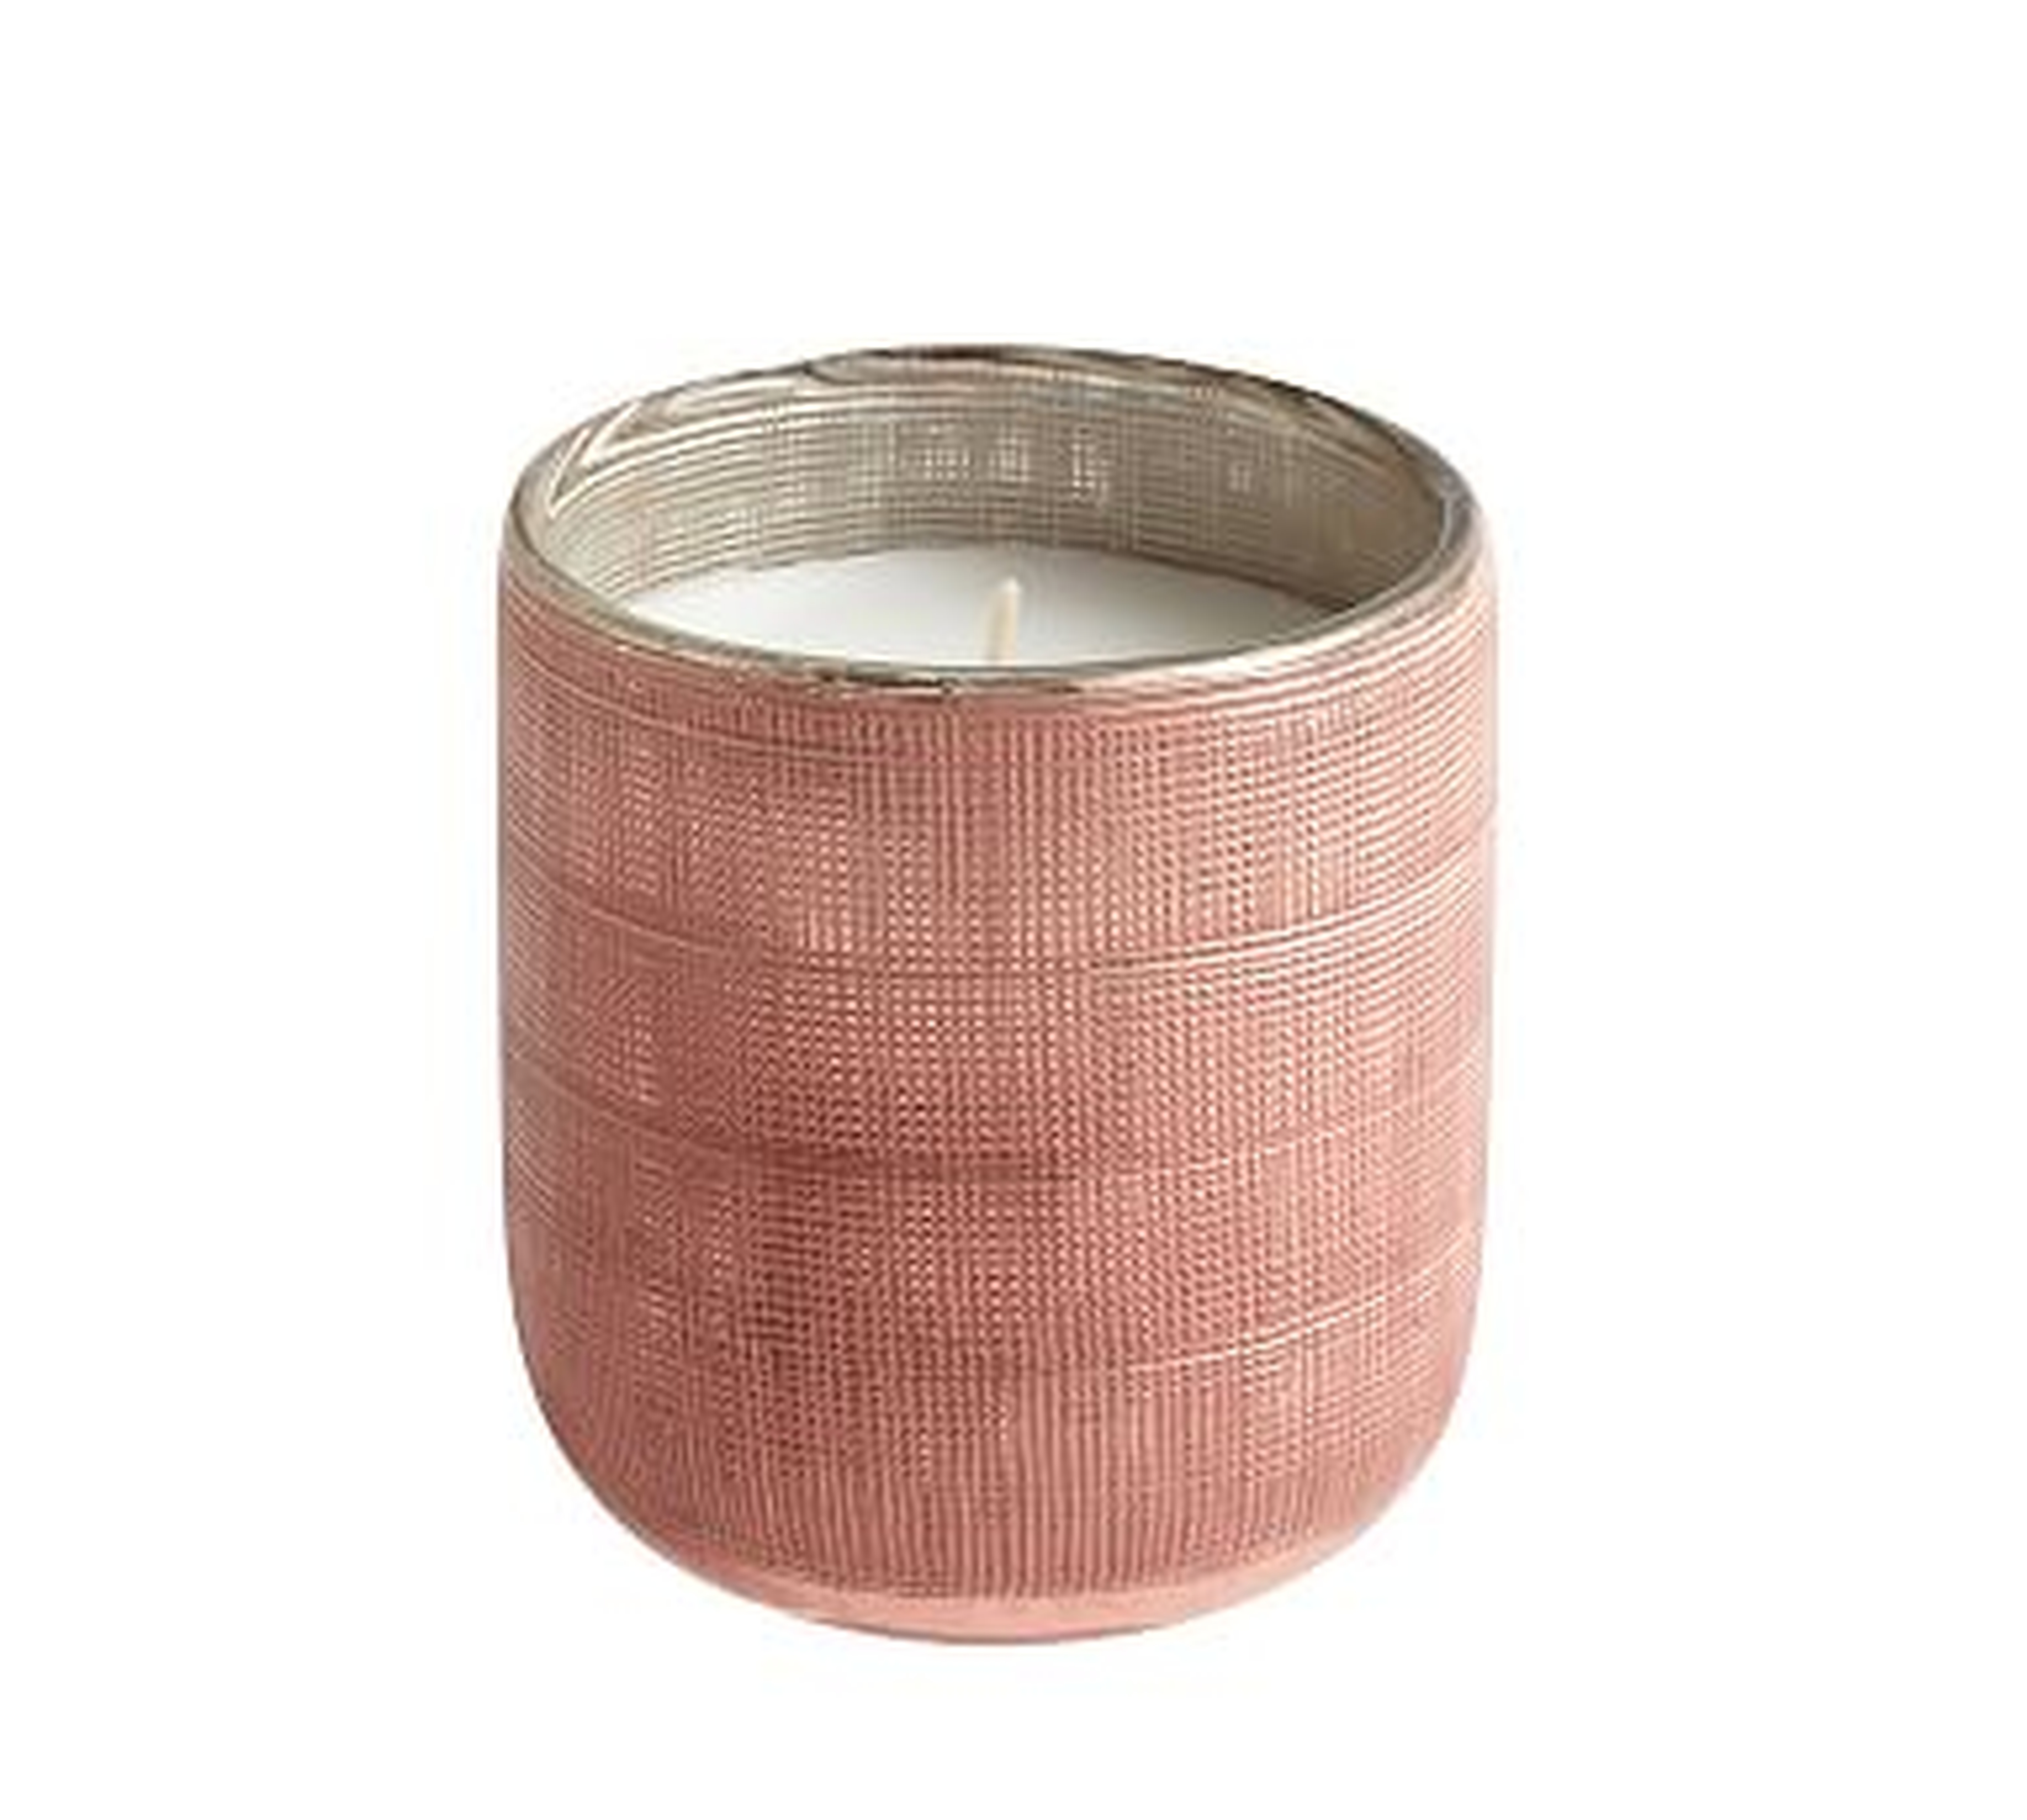 Linen Textured Mercury Glass Scented Candle, Pink, Small, French Tuberose - Pottery Barn